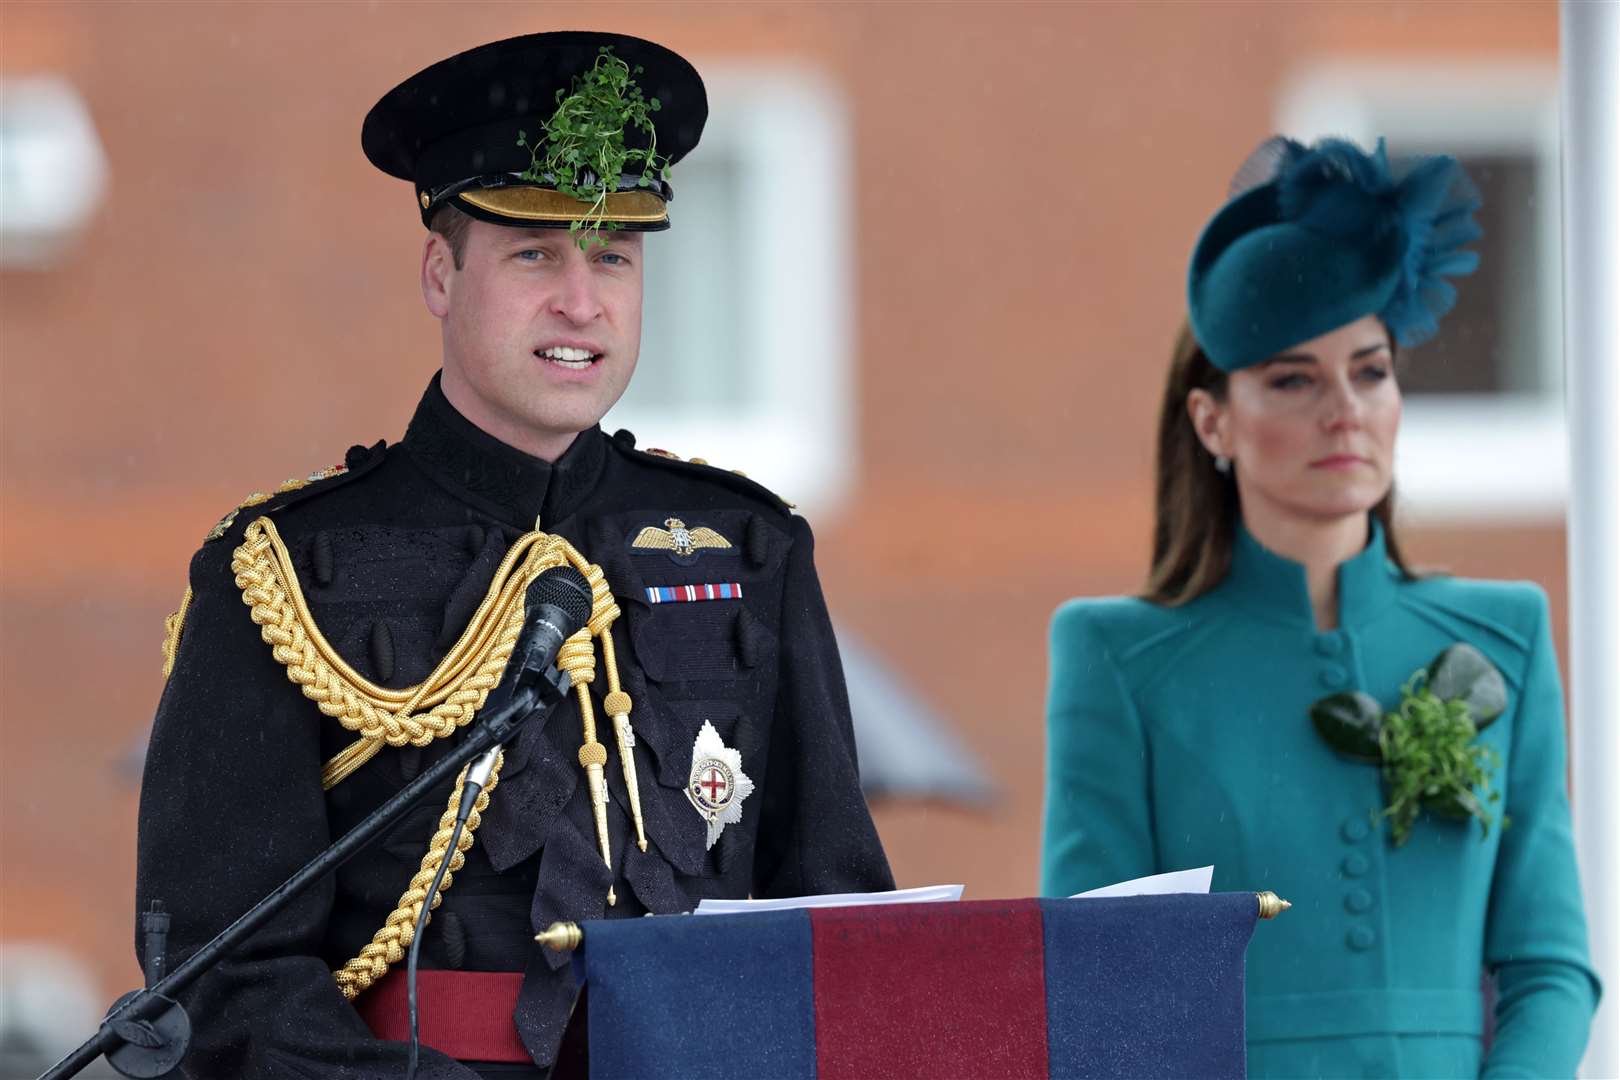 The Prince of Wales speaks on stage with the Princess of Wales during a visit to the 1st Battalion Irish Guards at Mons Barracks in Aldershot (Chris Jackson/PA)